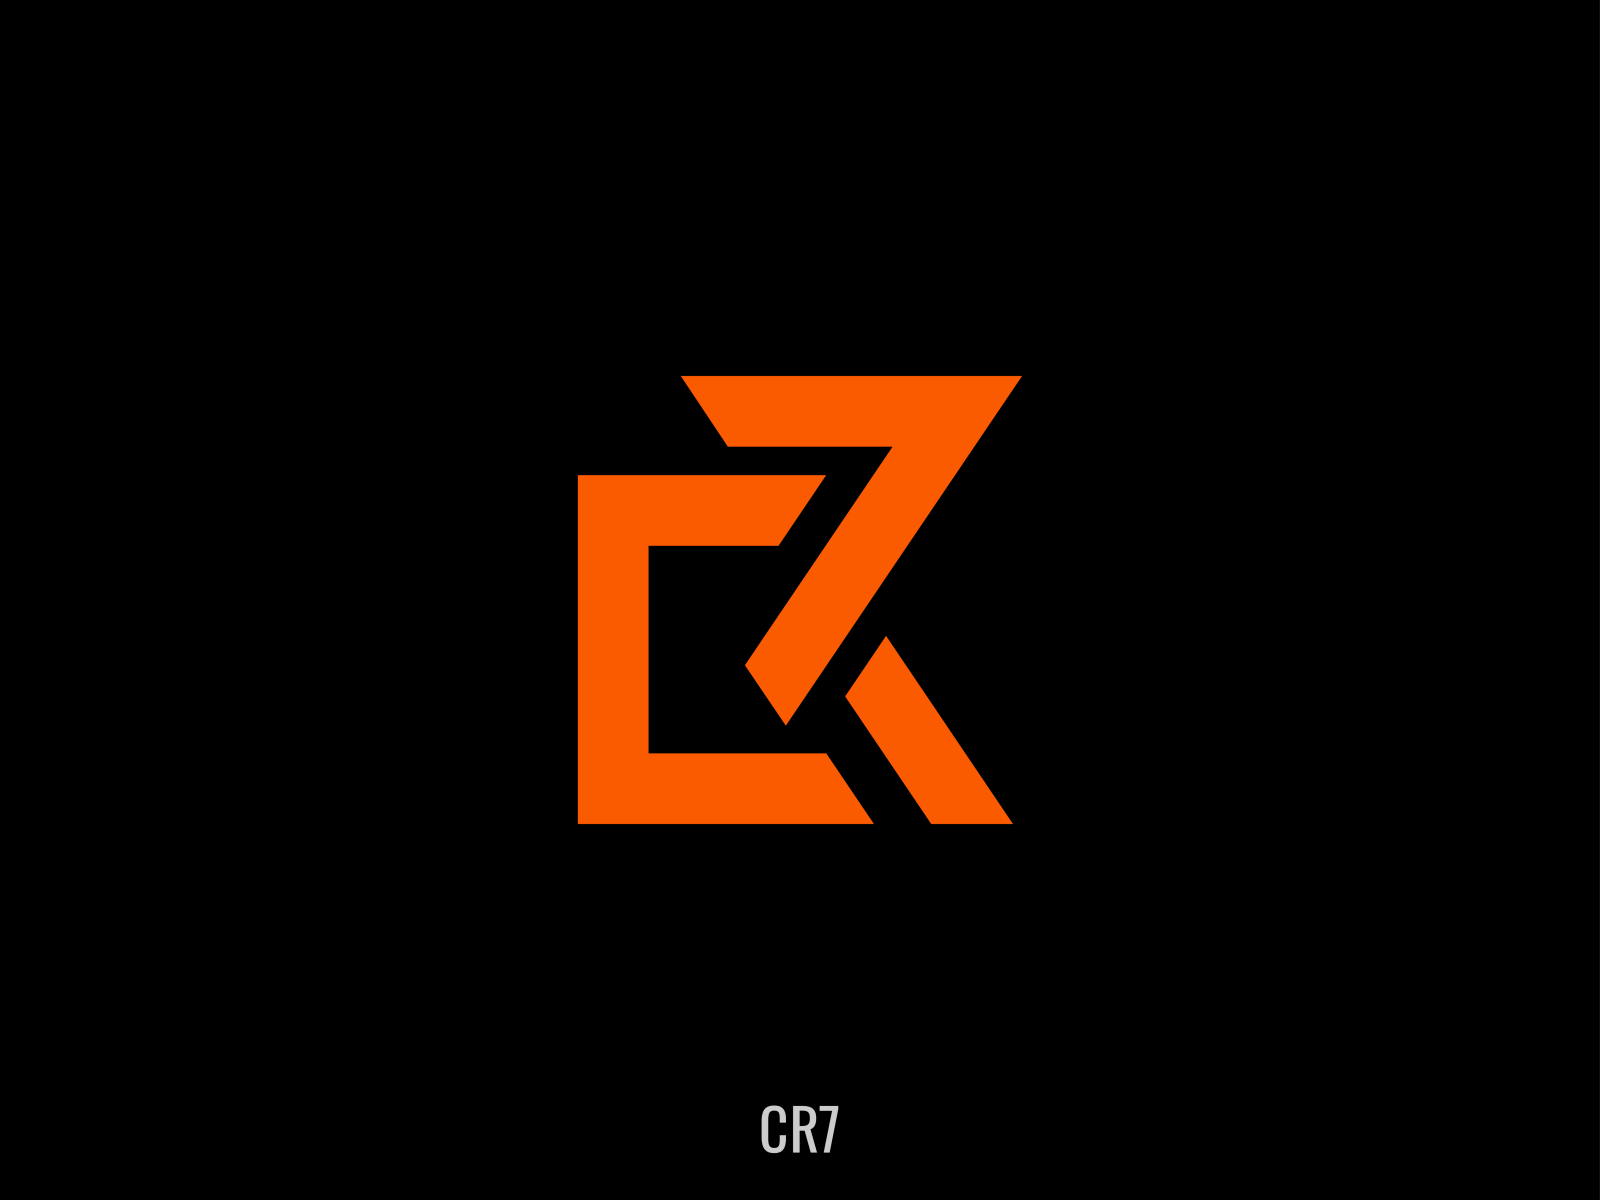 CR7 Logo Concept by Jowel Ahmed on Dribbble